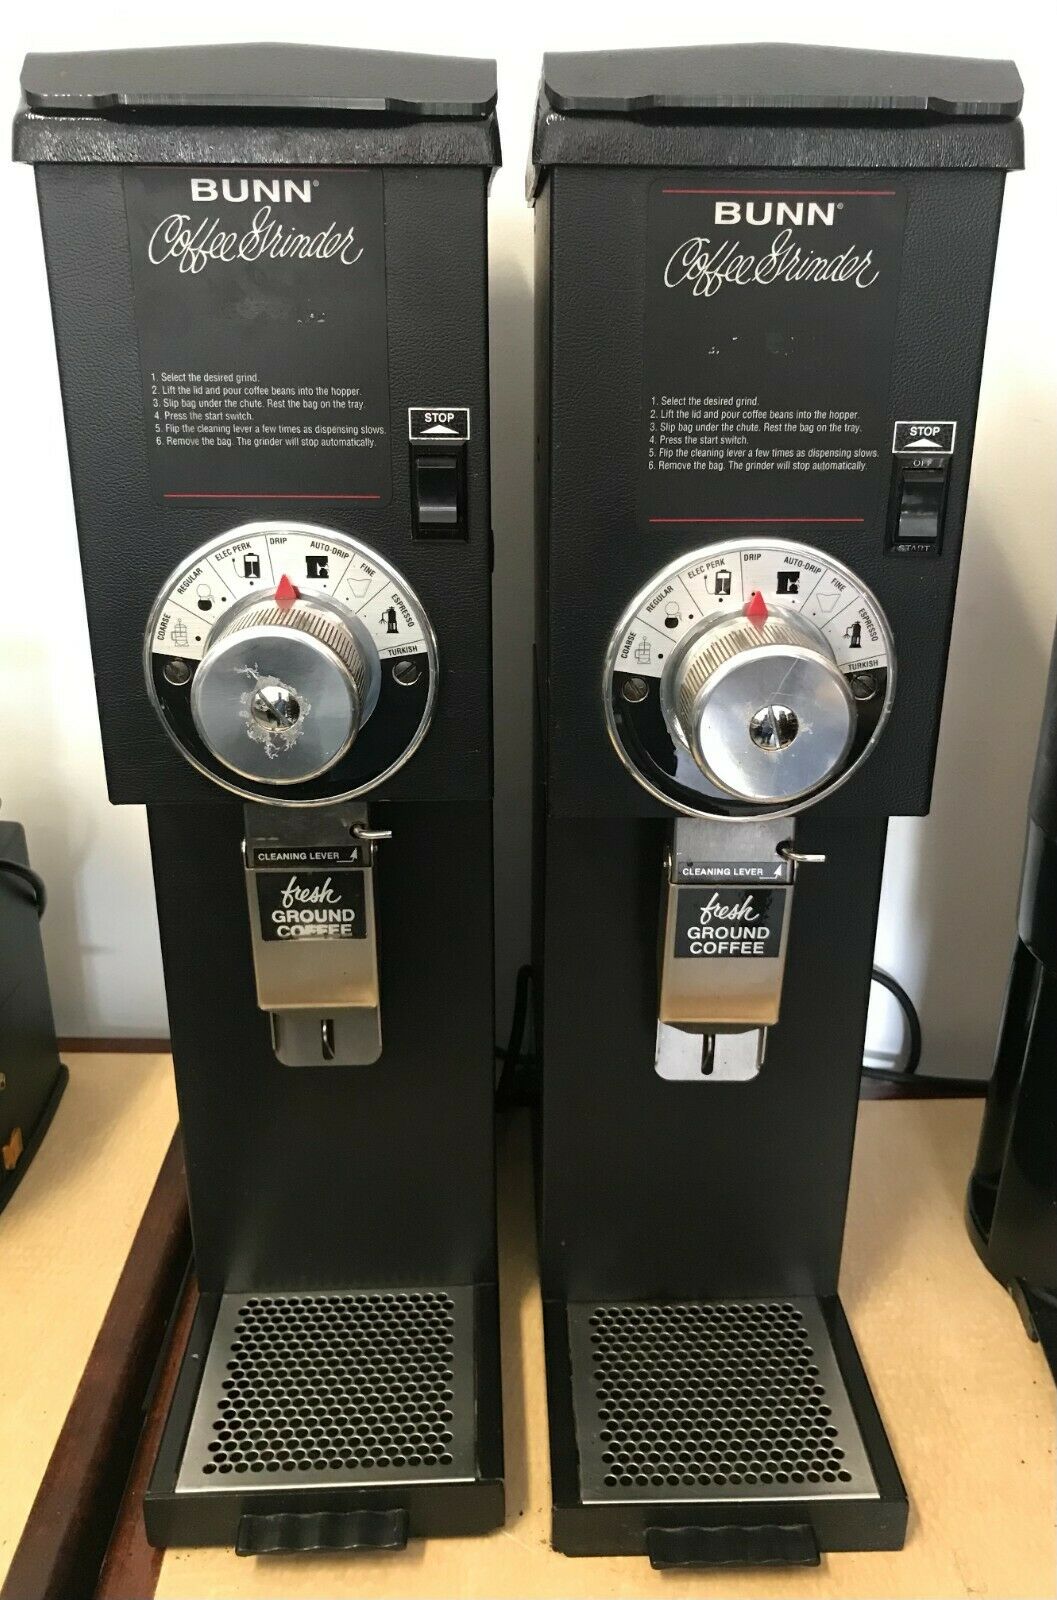 2 Bunn Commercial Coffee Grinders Save 60% Off New: $625 Great Condition (22100)